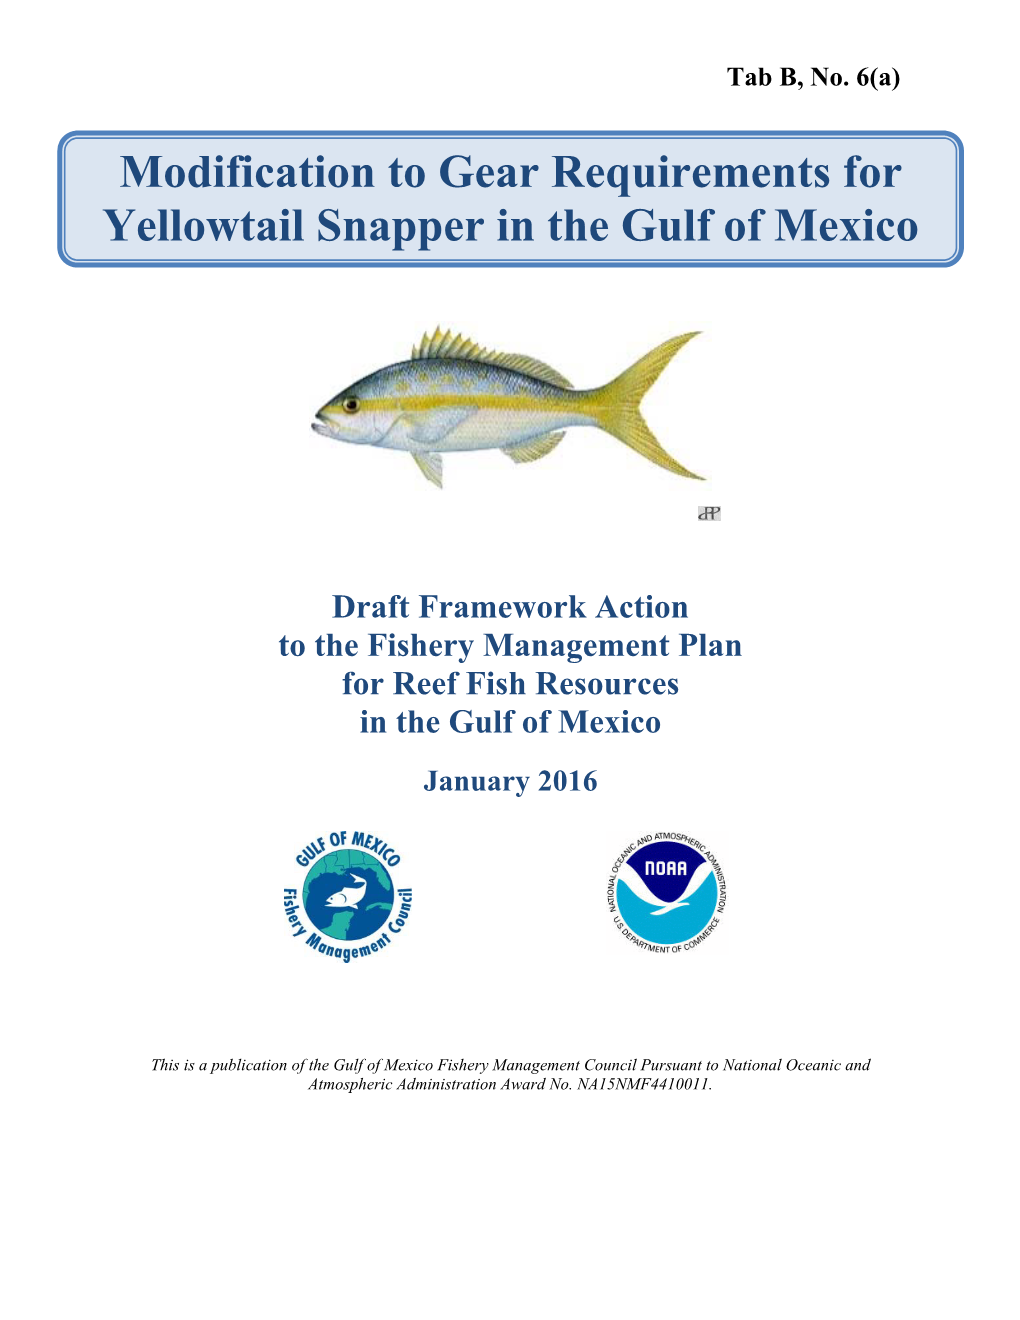 Modification to Gear Requirements for Yellowtail Snapper in the Gulf of Mexico